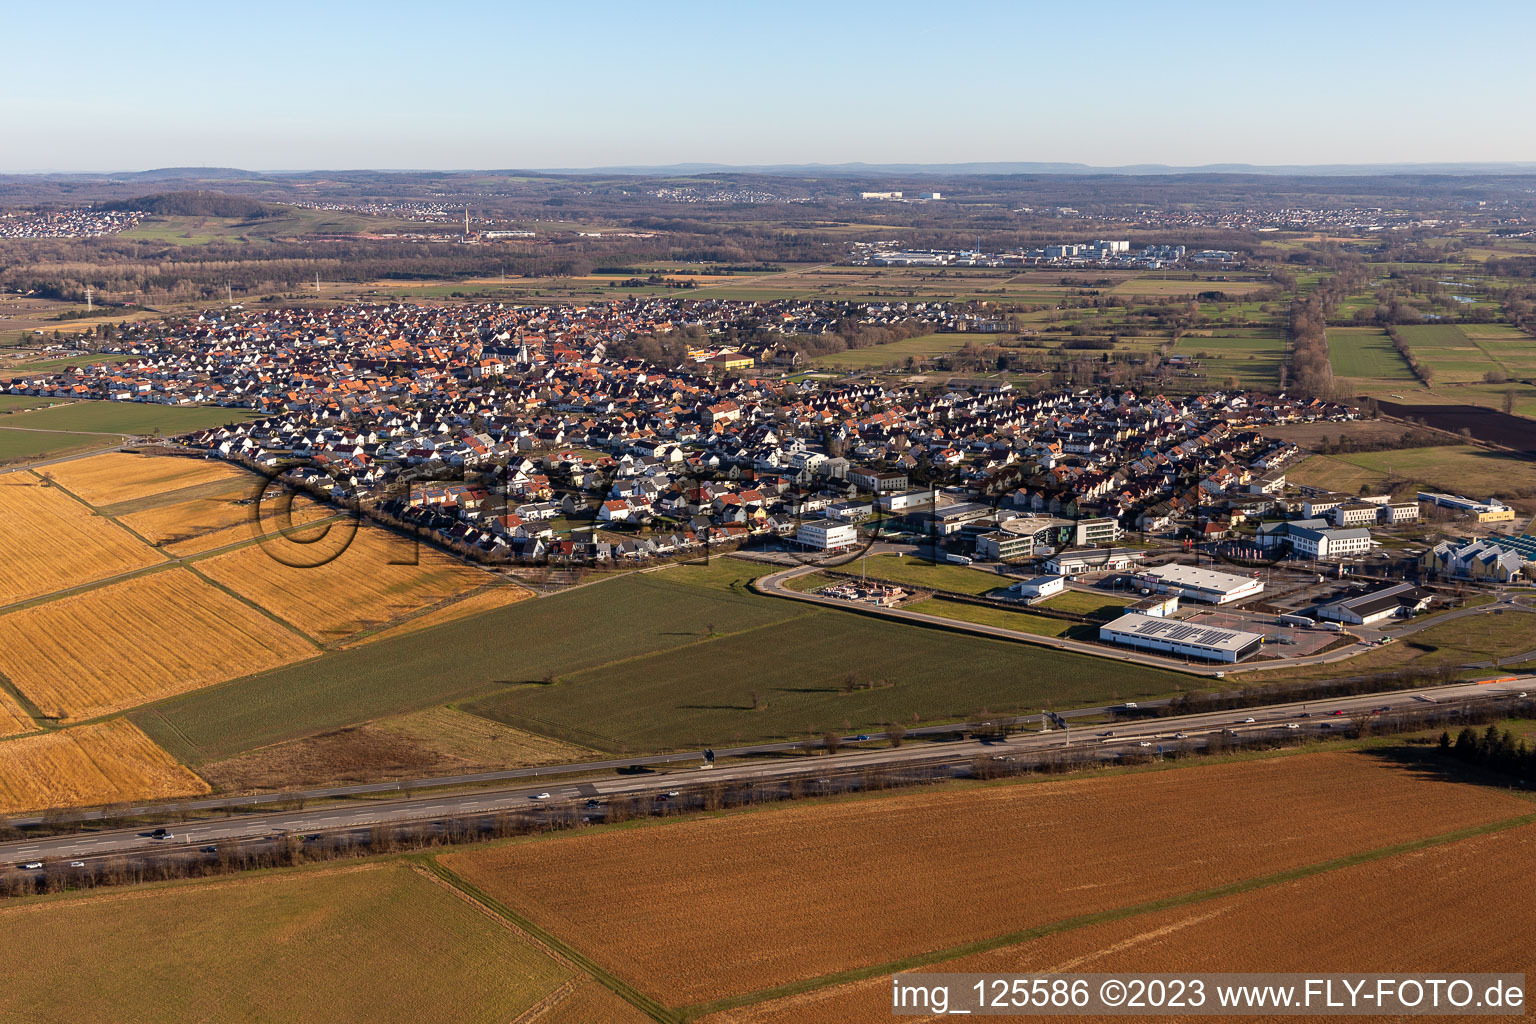 Village view on the edge of agricultural fields and land in the district Rot in Sankt Leon-Rot in the state Baden-Wuerttemberg, Germany